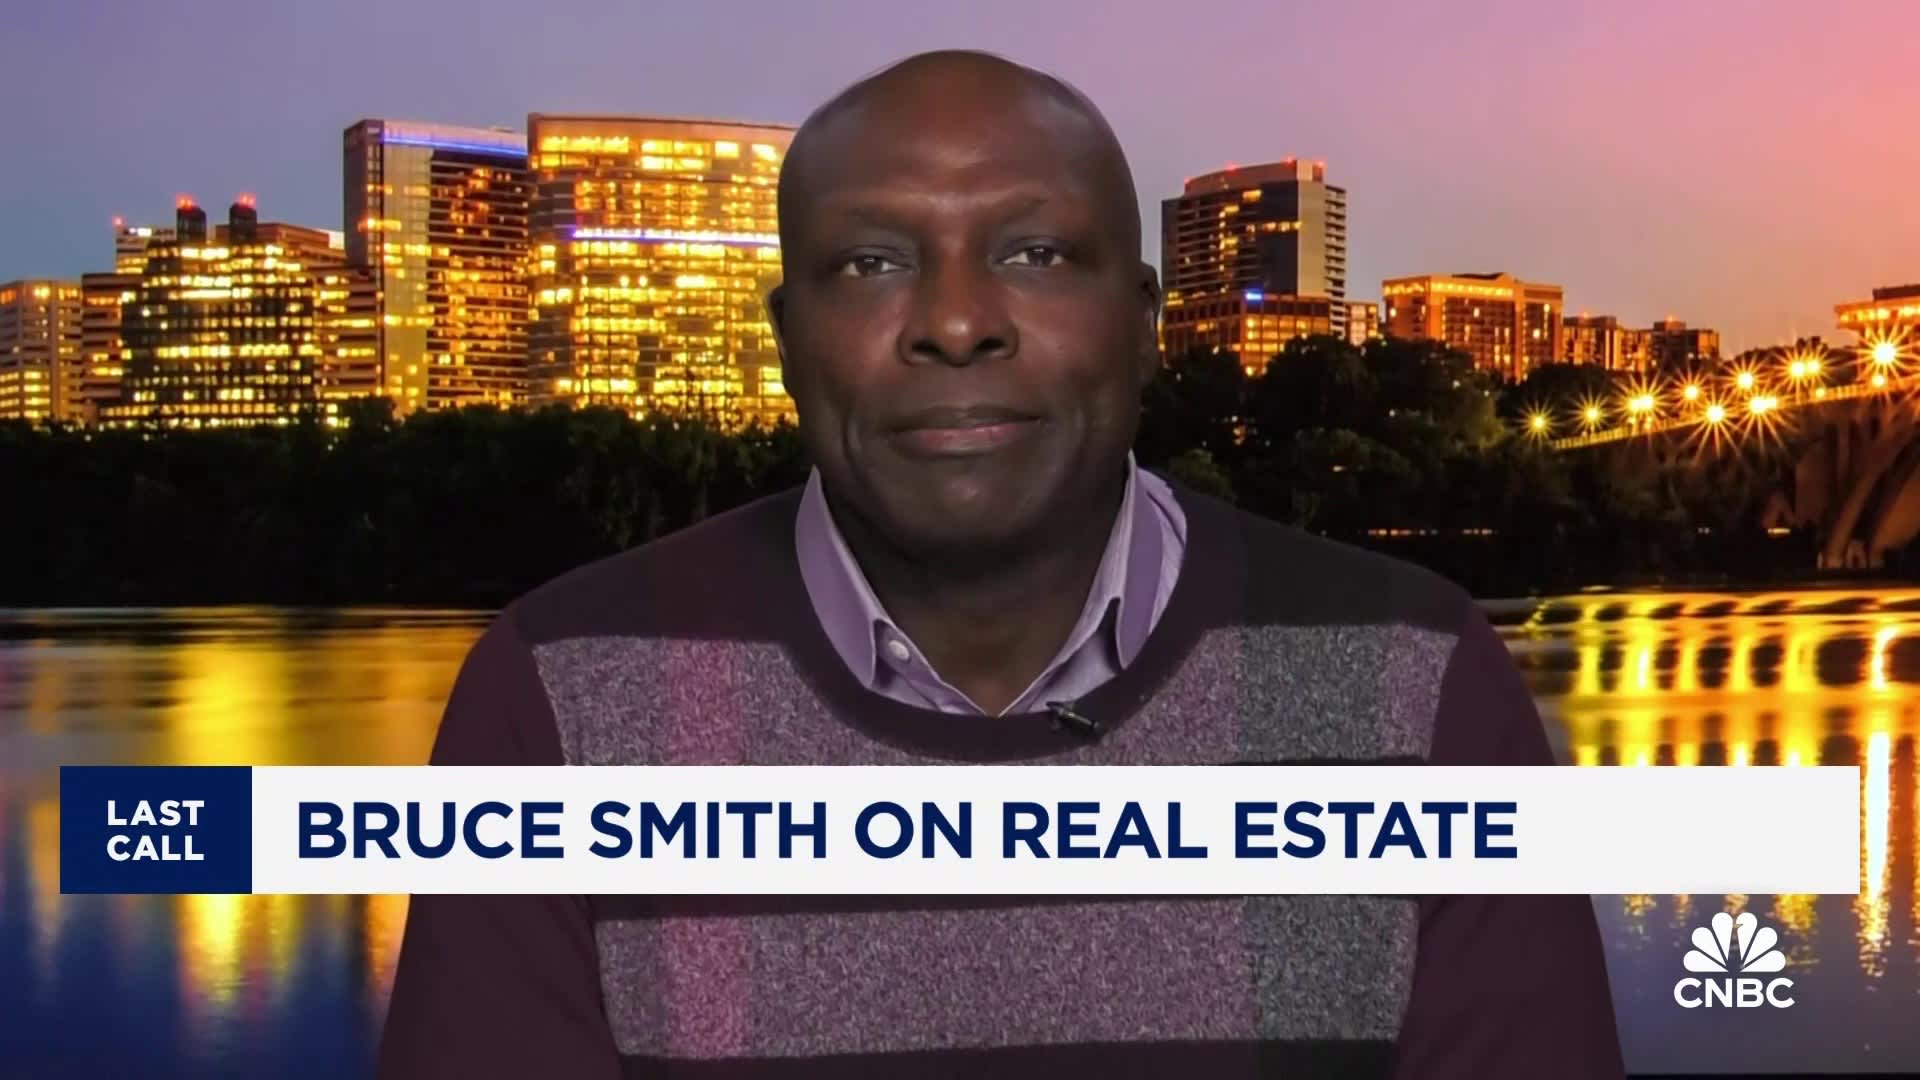 NFL Hall of Famer Bruce Smith talks real estate and the impact of interest rates